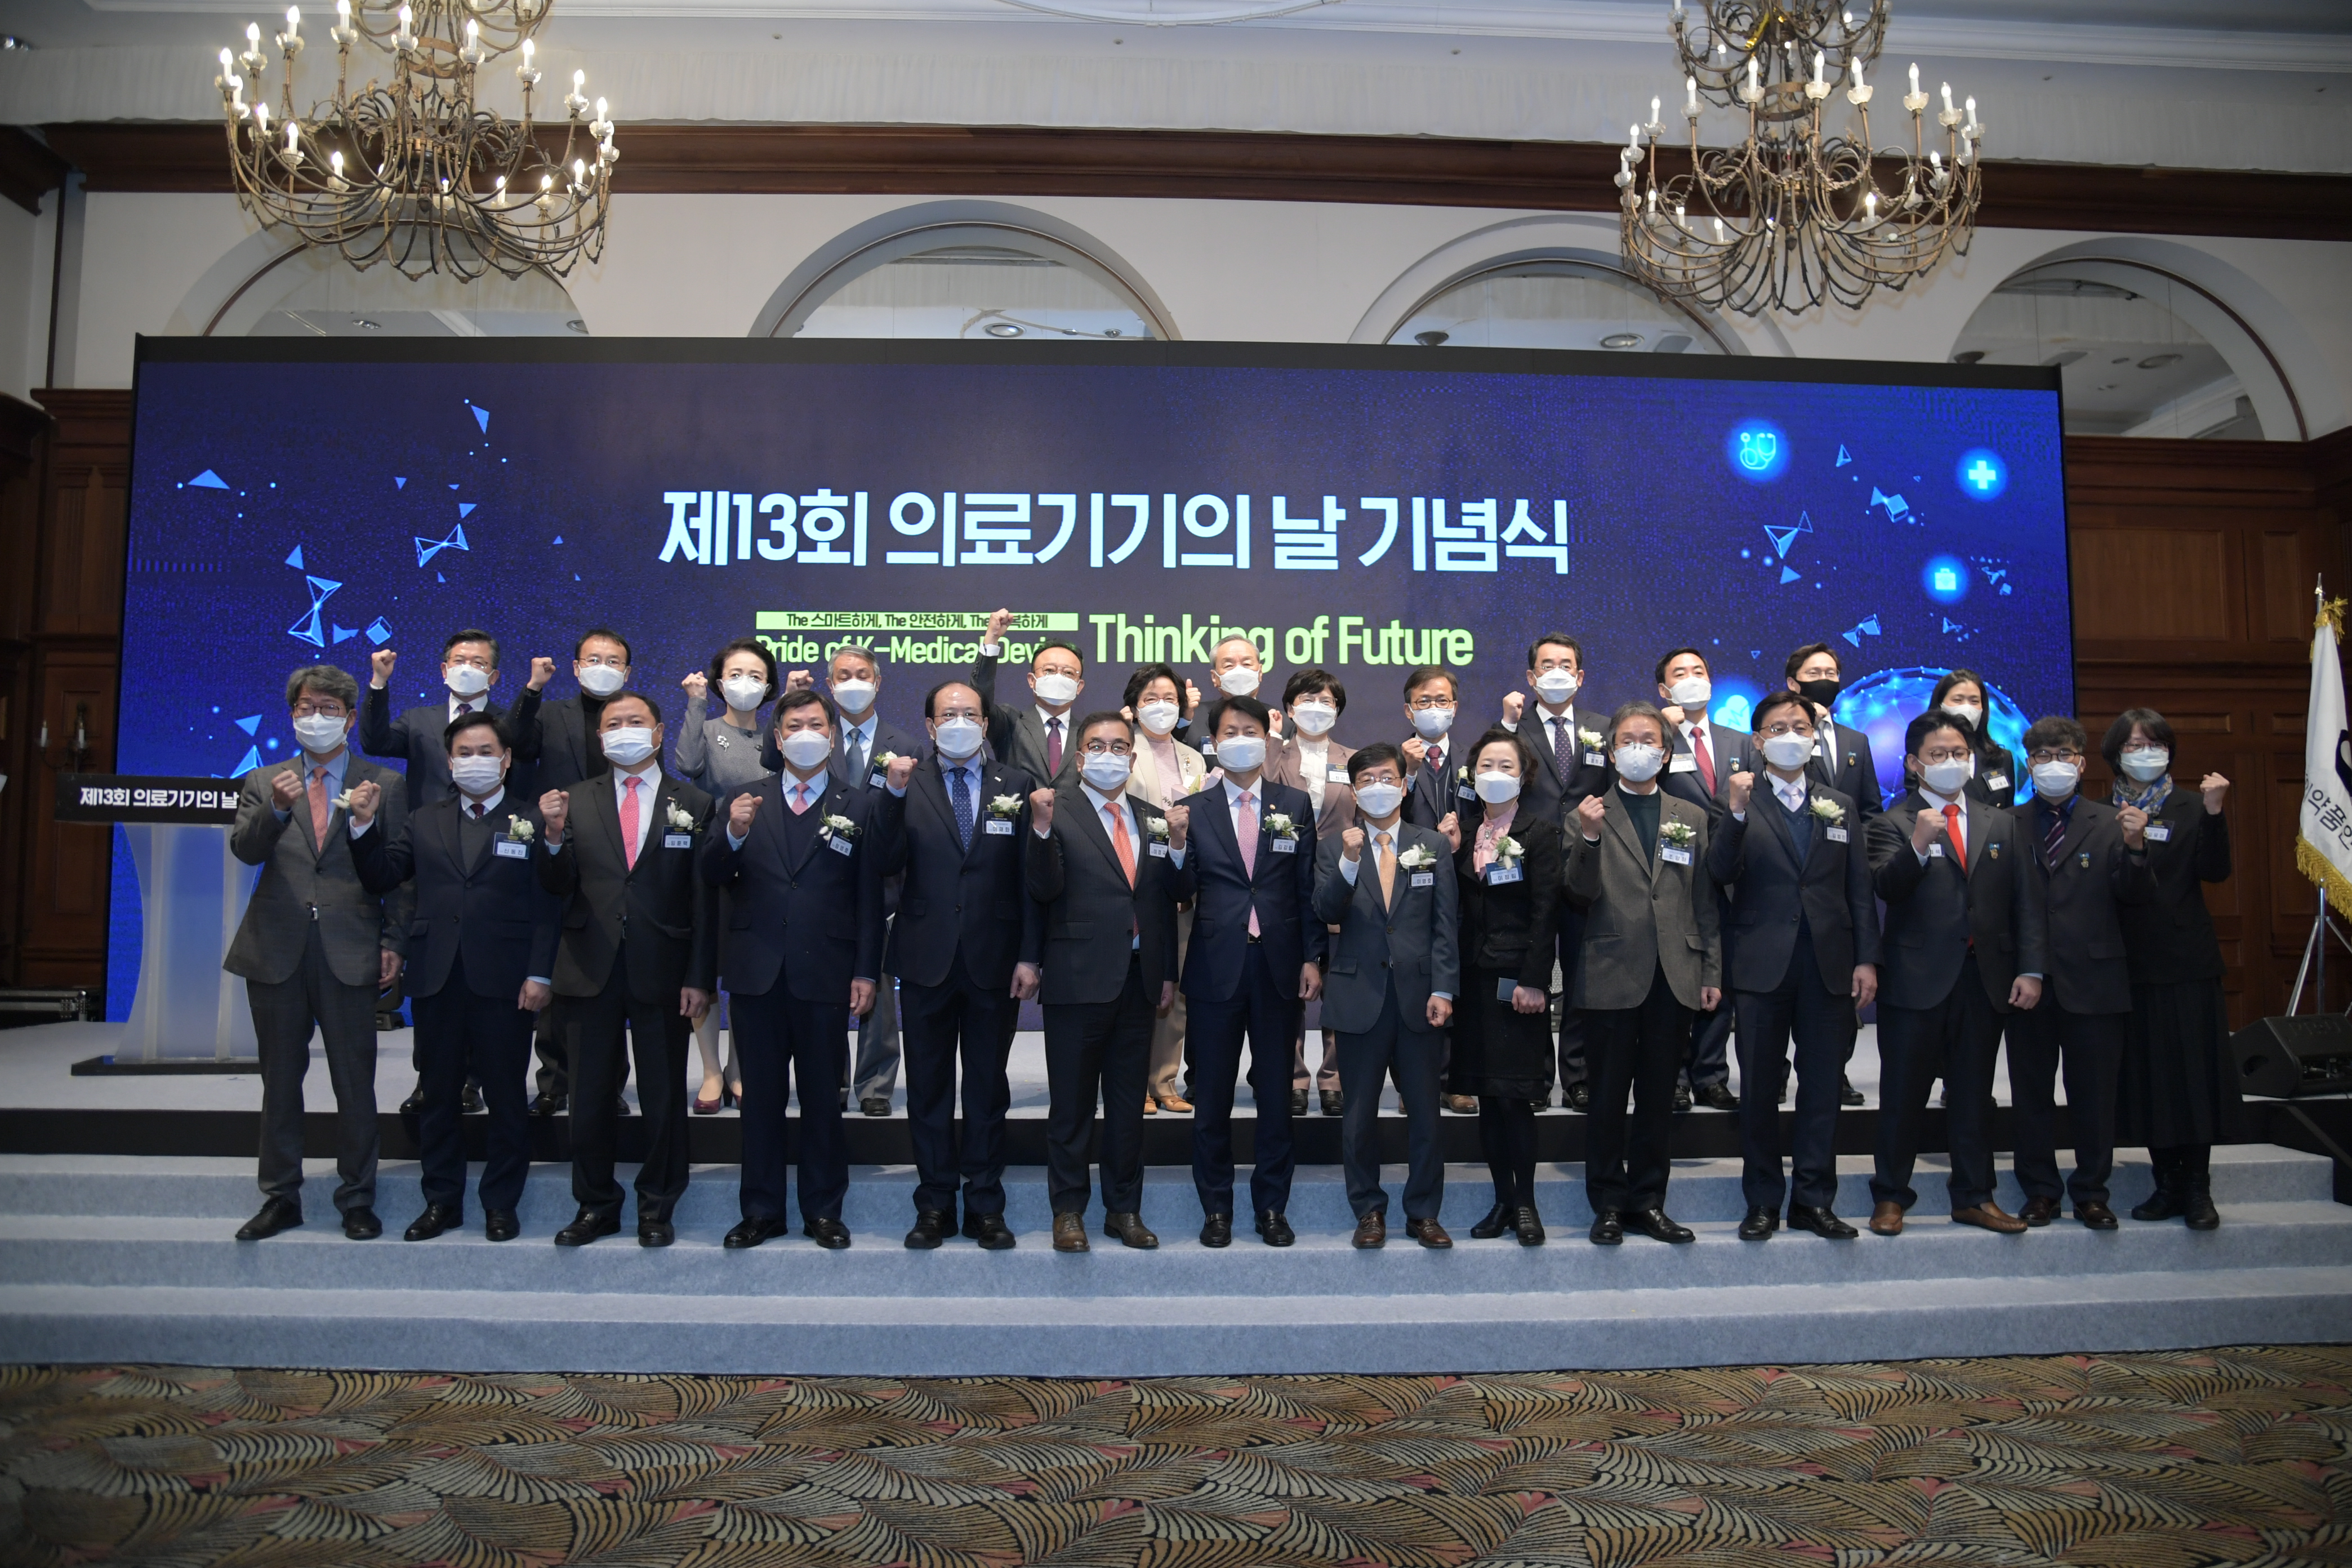 Photo News1 - [Nov. 20, 2020] A Commemorative Ceremony of the 13th Day of Medical Device